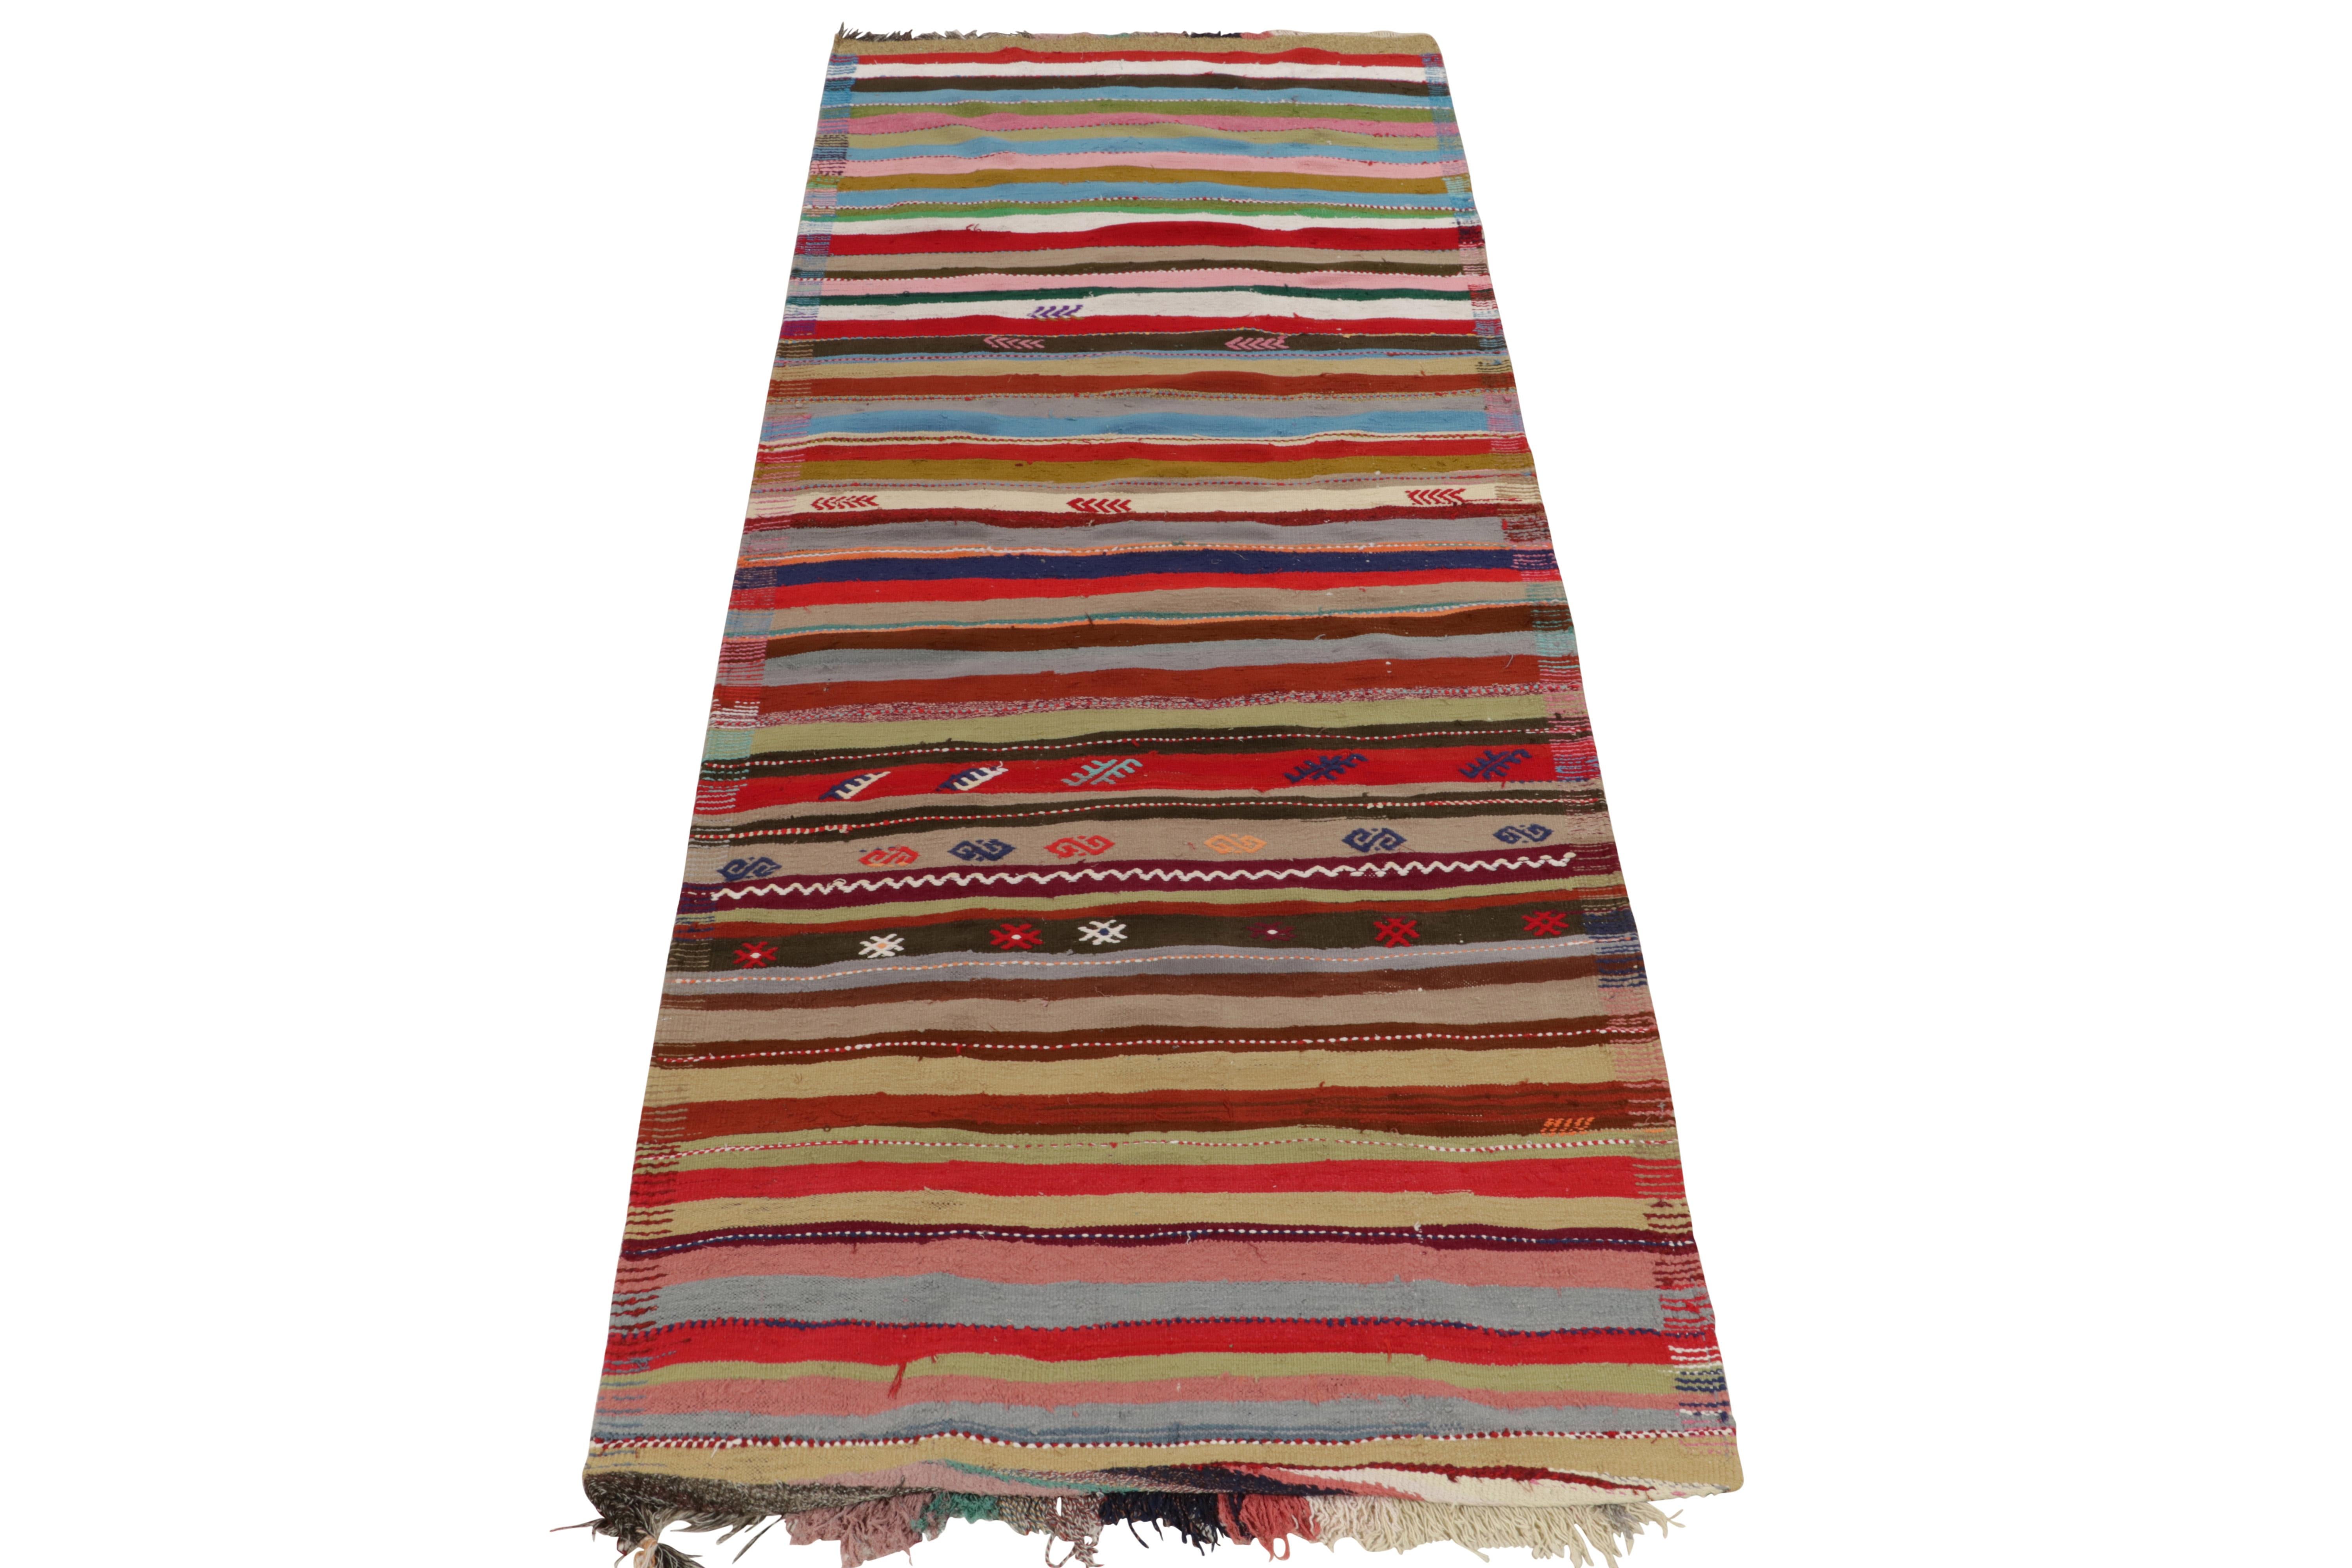 From a distinctive mid-century Chaput Kilim curation, a rare 5 x 12 rug handwoven in wool from Turkey circa 1950-1960. Enjoying a polychromatic, almost rainbow approach to spectral colors with embroidered geometry and tribal motifs. Prevailing red,